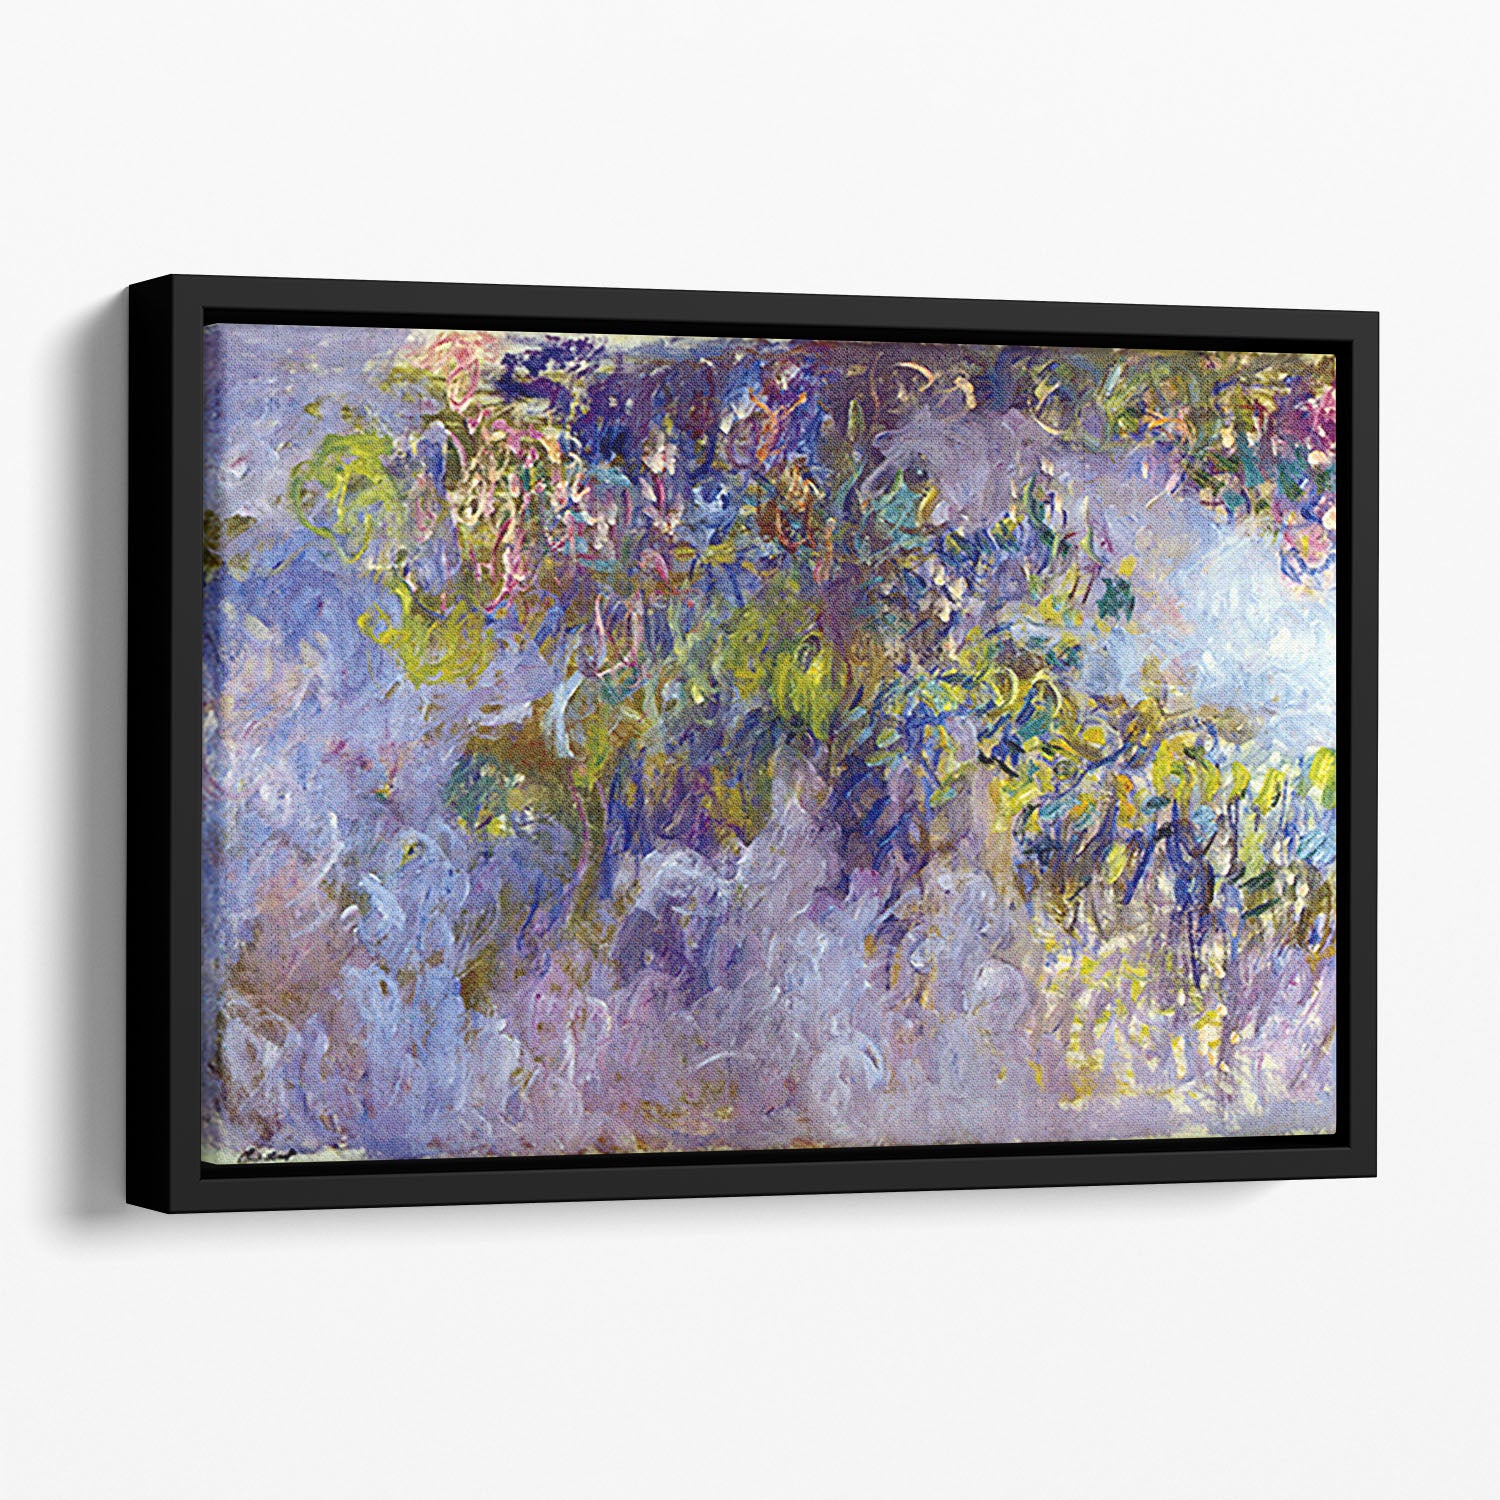 Wisteria 1 by Monet Floating Framed Canvas